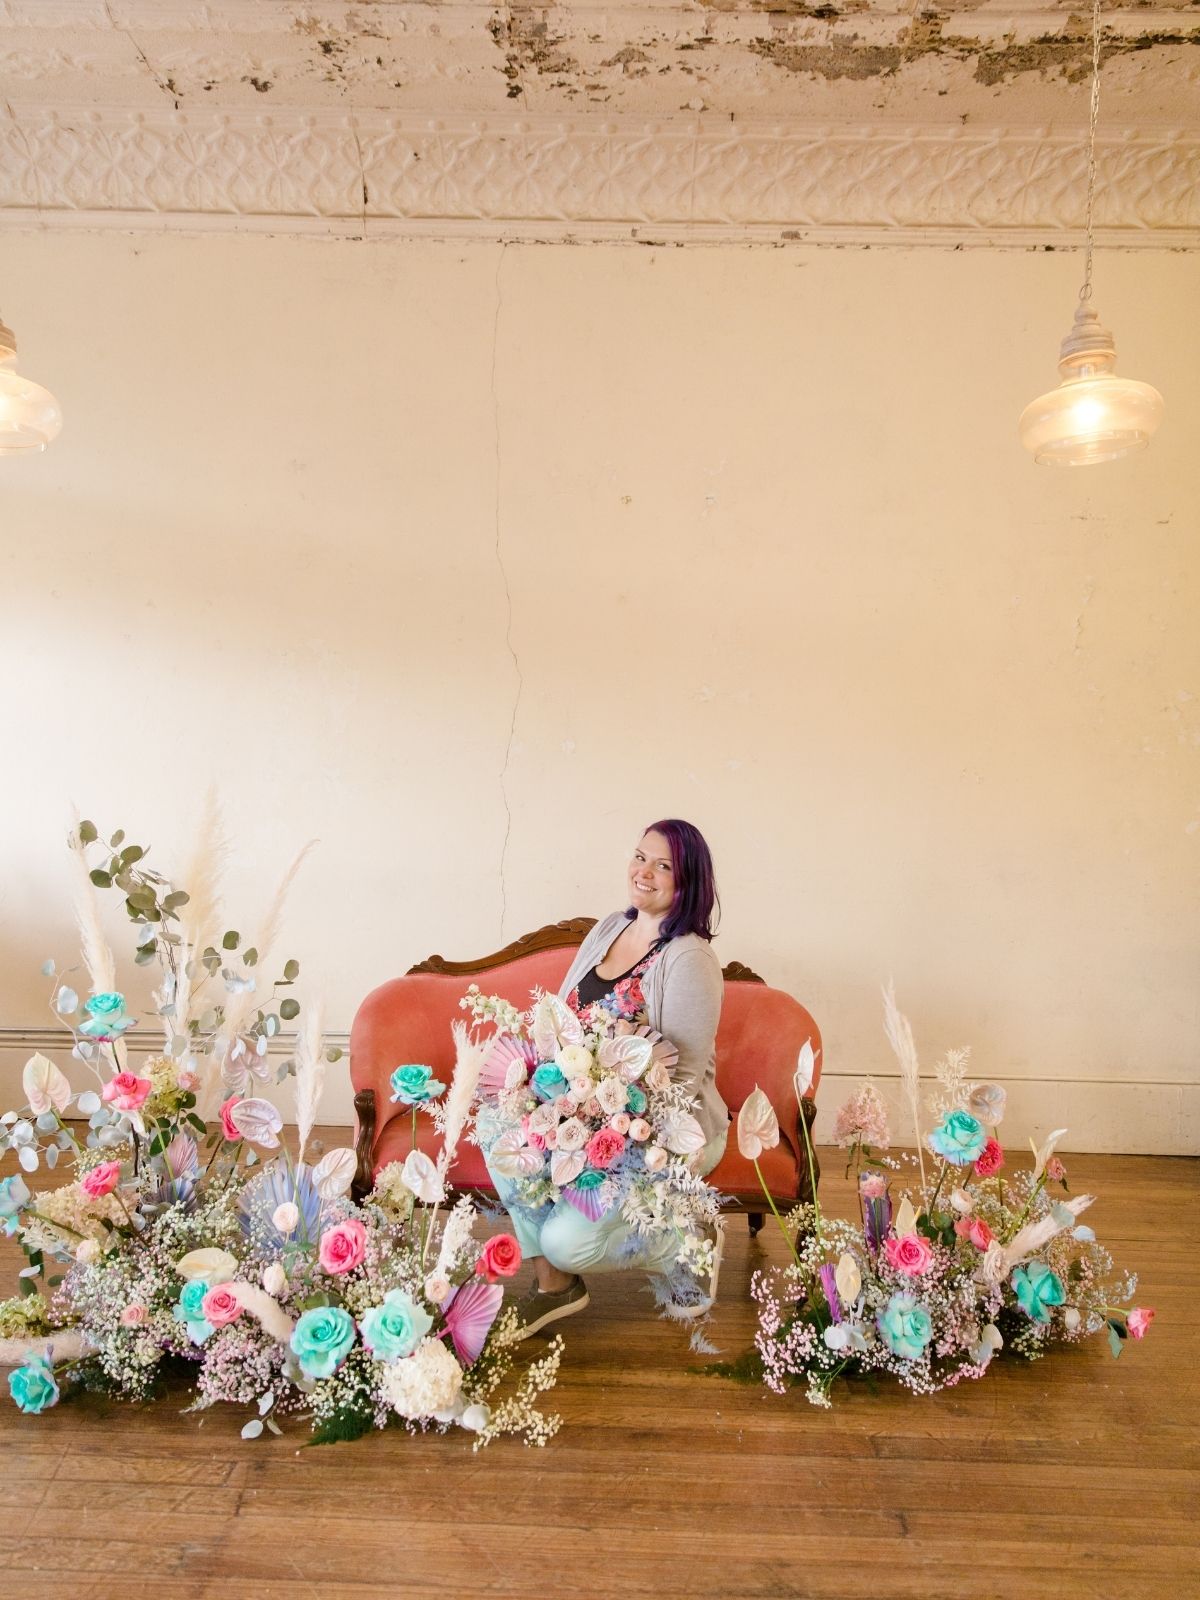 Erin McLarty - Eden's Echo - interview on Thursd - Monica Roberts Photography - Erin and a holographic floral design setting